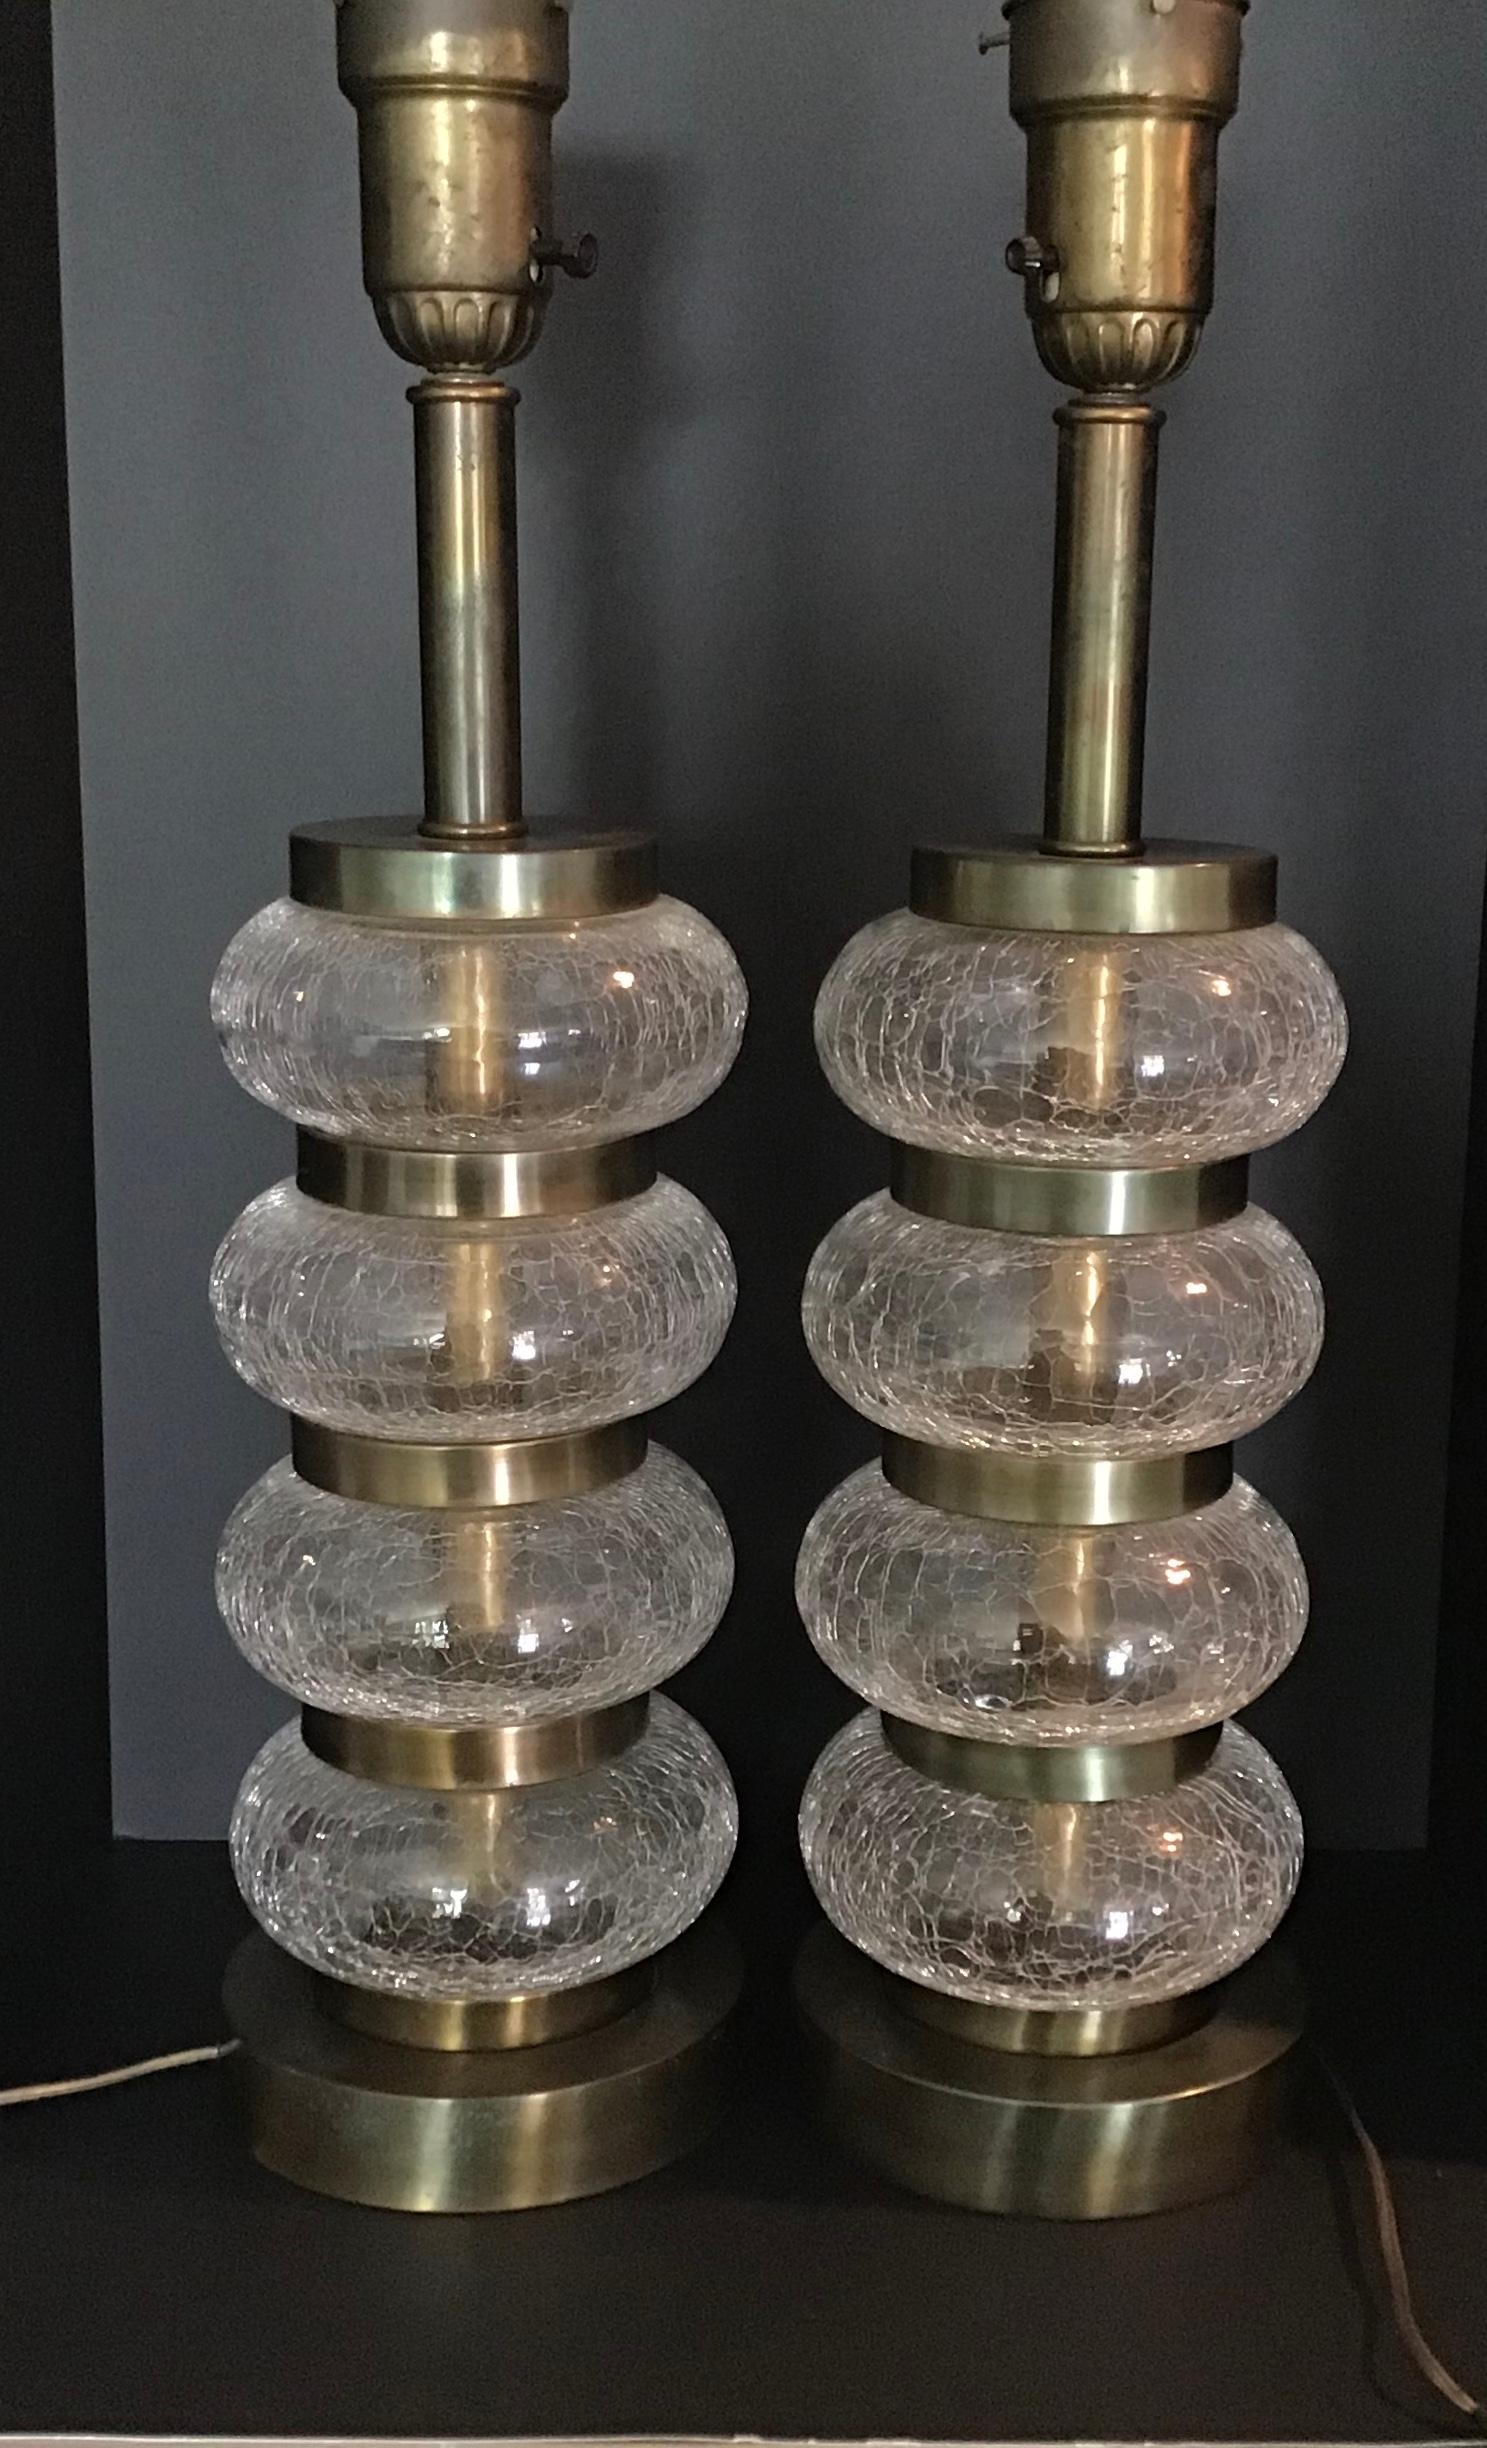 Great all original pair of Paul Hanson Lighting Company lamps circa 1950’s. Lamps are all original including the hardware and shade rests. The glass radiates when the light hits the crackle design. Glass sections are wide and the lamps are very